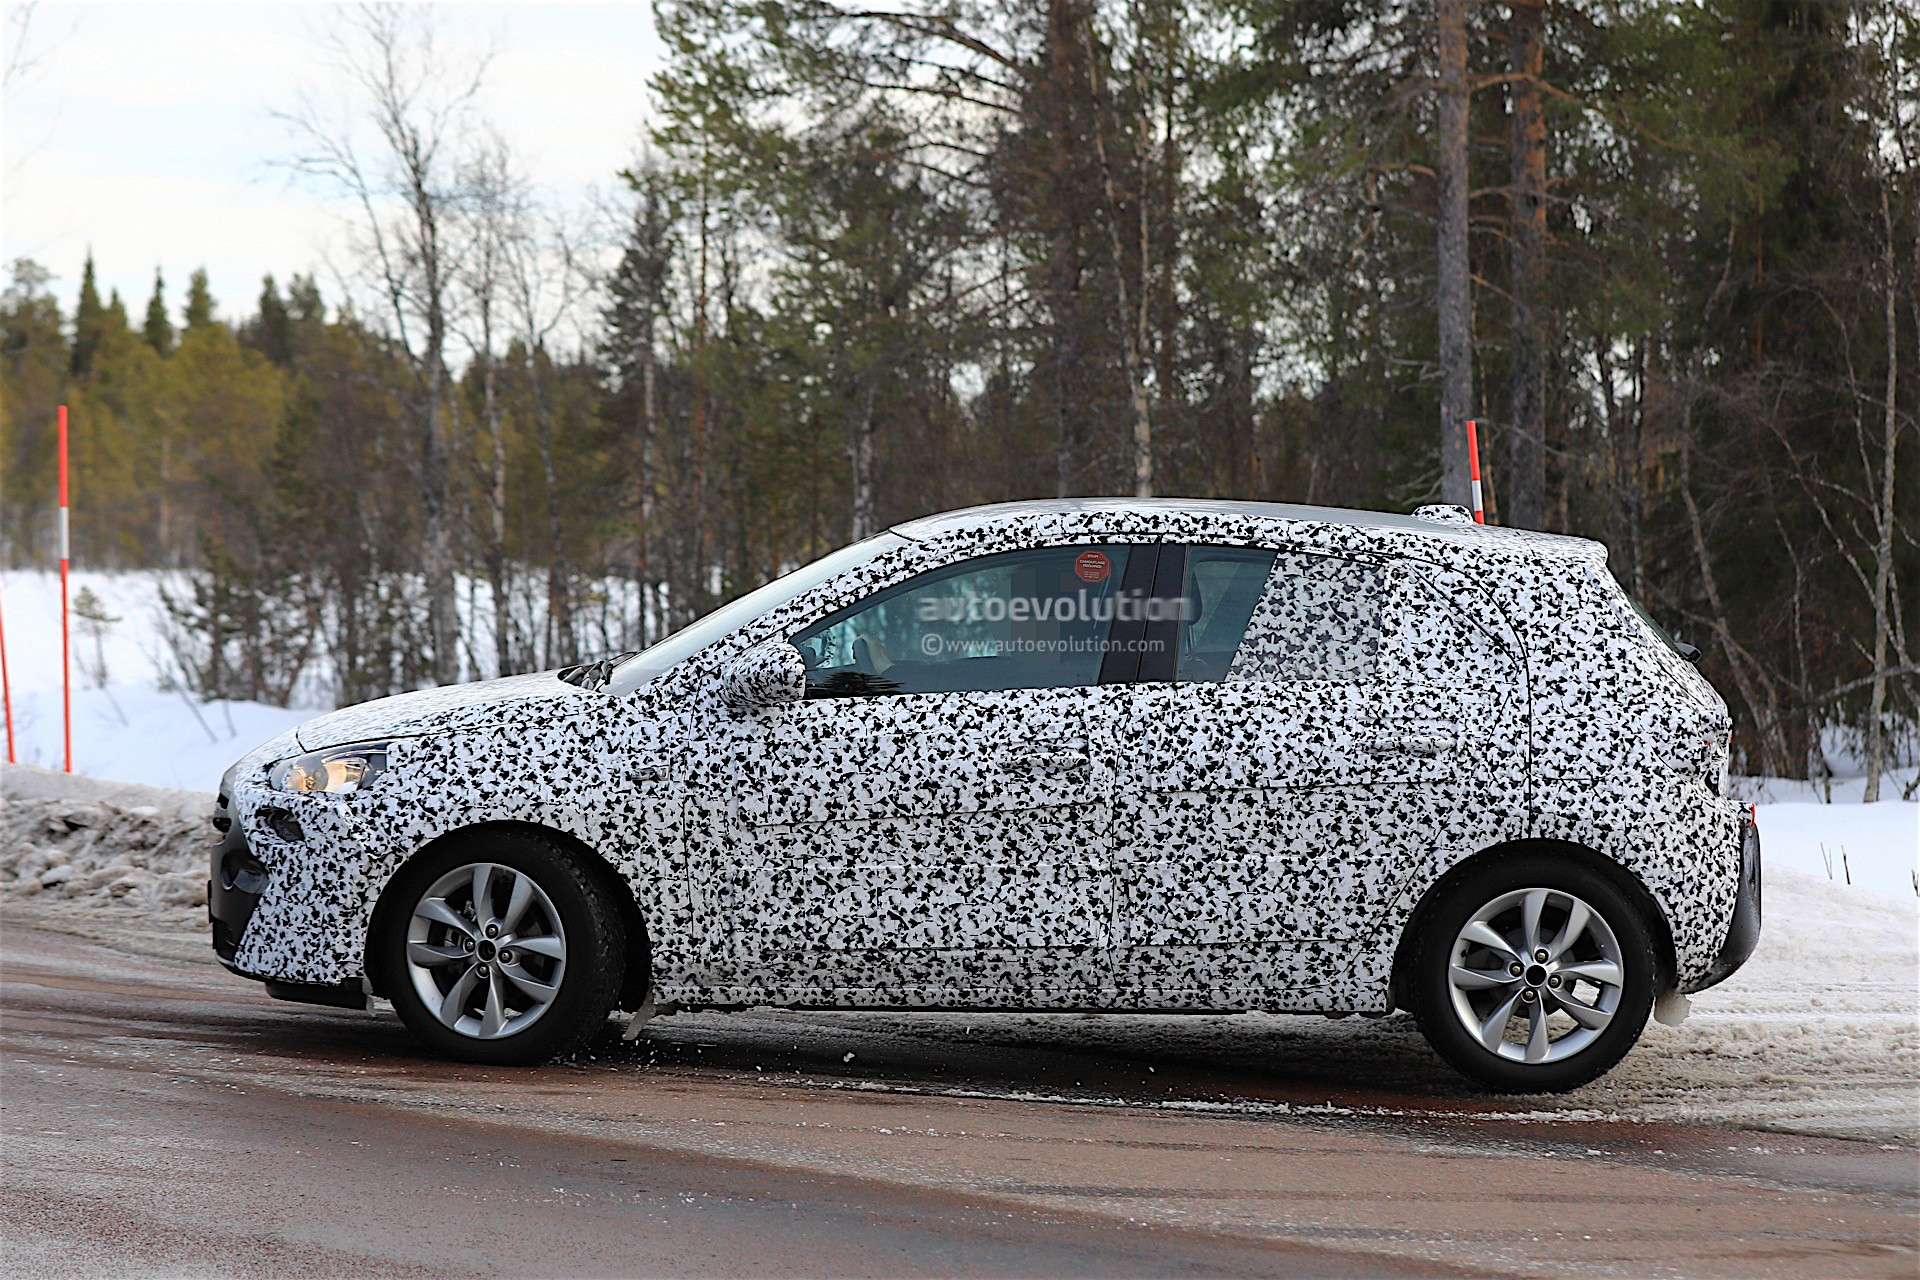 2019 Opel Corsa F “Will Not Be Compromised In Any Way” - autoevolution